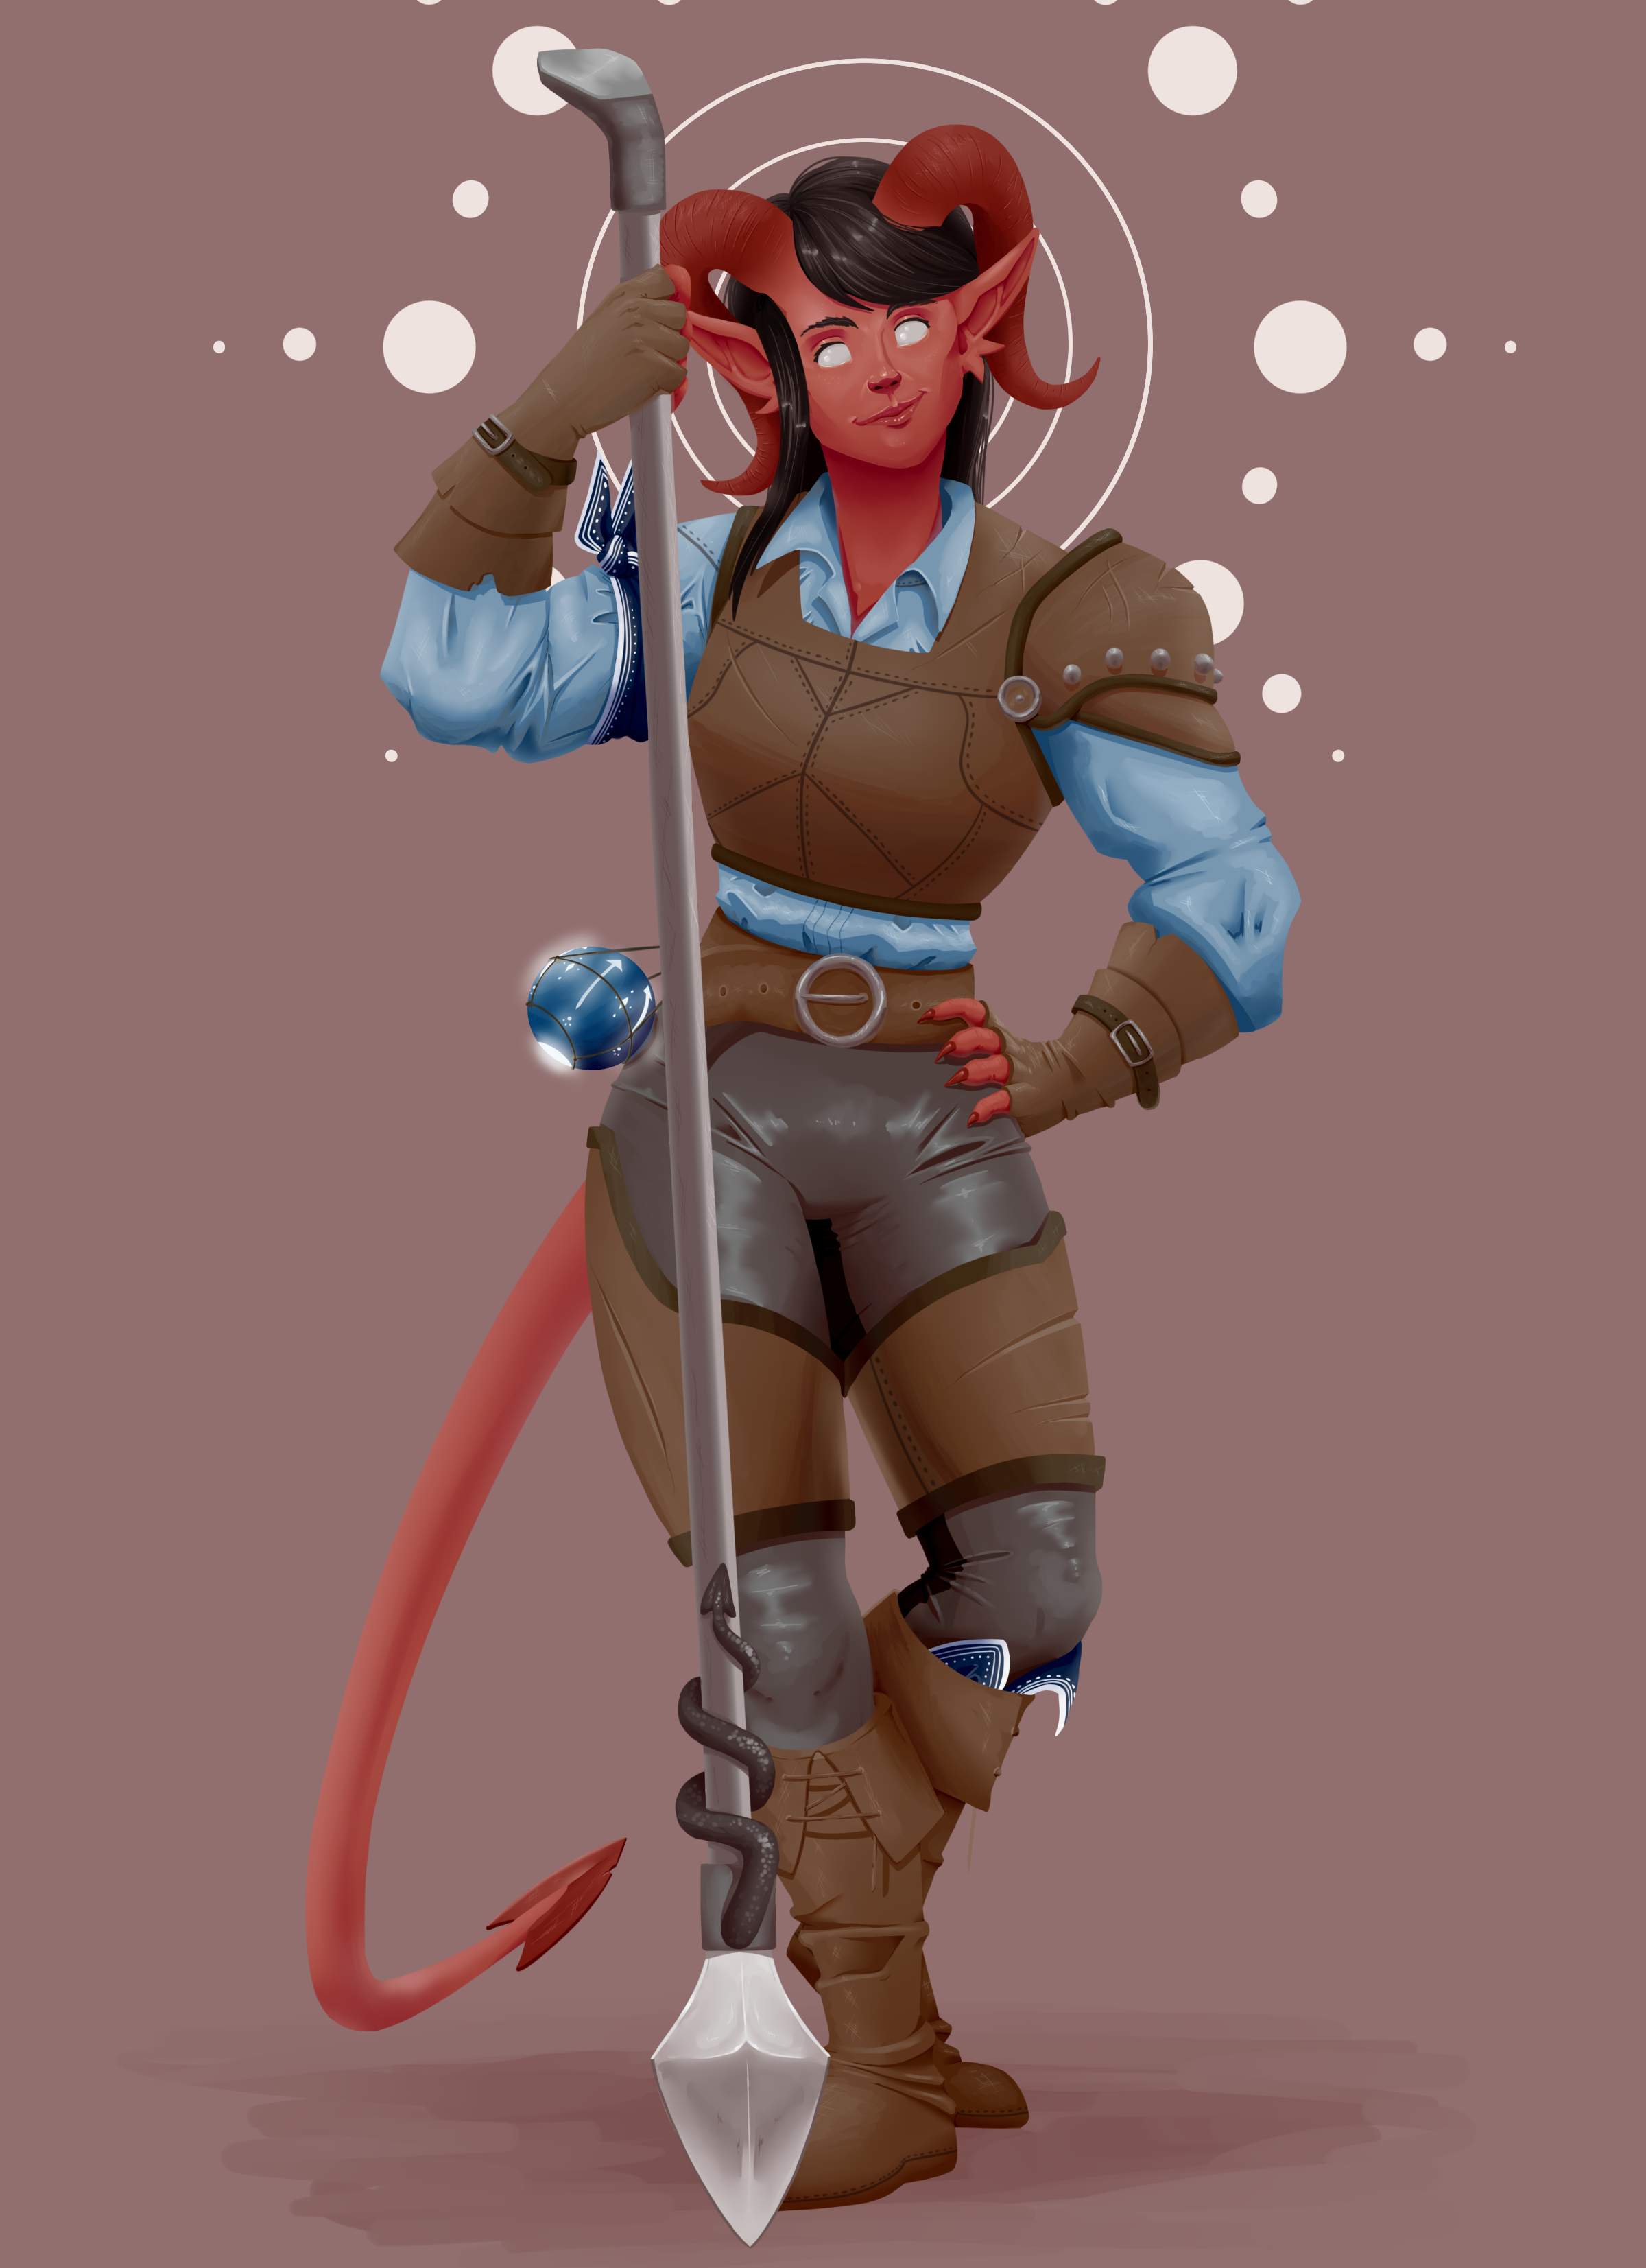 A painting of Mardoris, a red tiefling (demon person), in a jaunty pose with their hand on their hip. They have long black hair and silver eyes, and their horns curl around their ears like a ram's. They're wearing light brown leather armor and boots with a blue shirt and gray ppants. They're hollding a spear with its head planted into the earth. Beneath the spear's head, there is a small, metal decoration of a demon's tail wrapped around the haft, and there is a crowbar's prying tool at the butt of the spear.